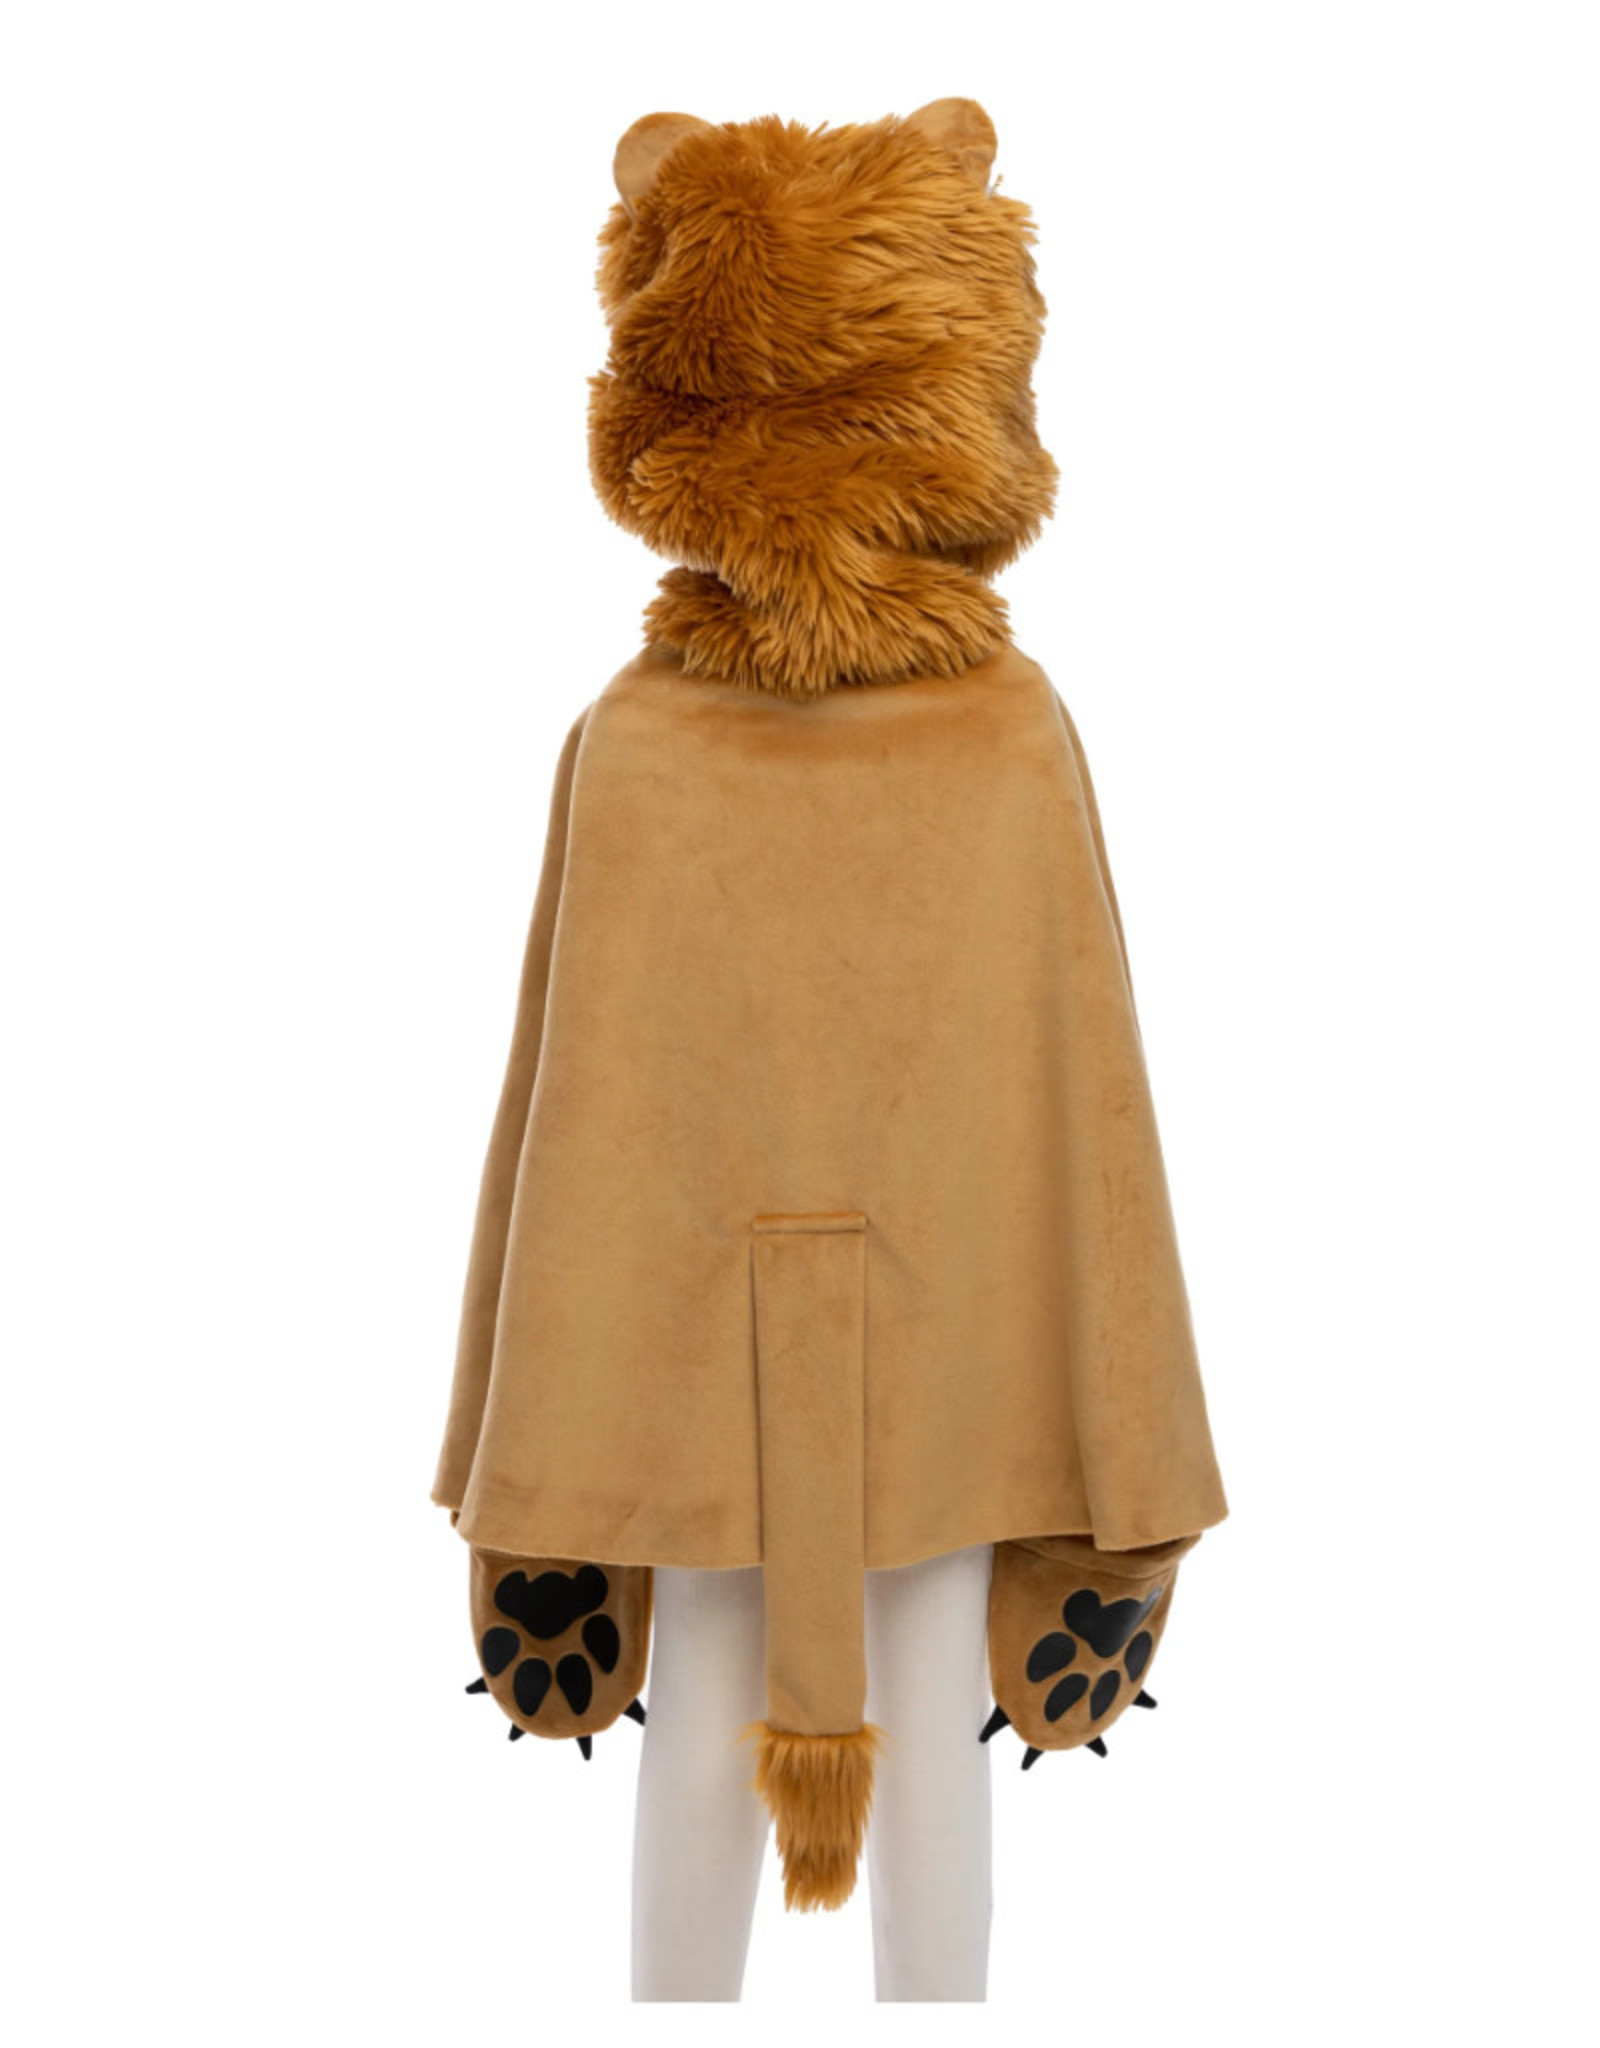 Great Pretenders Storybook Lion Cape Size 2-3